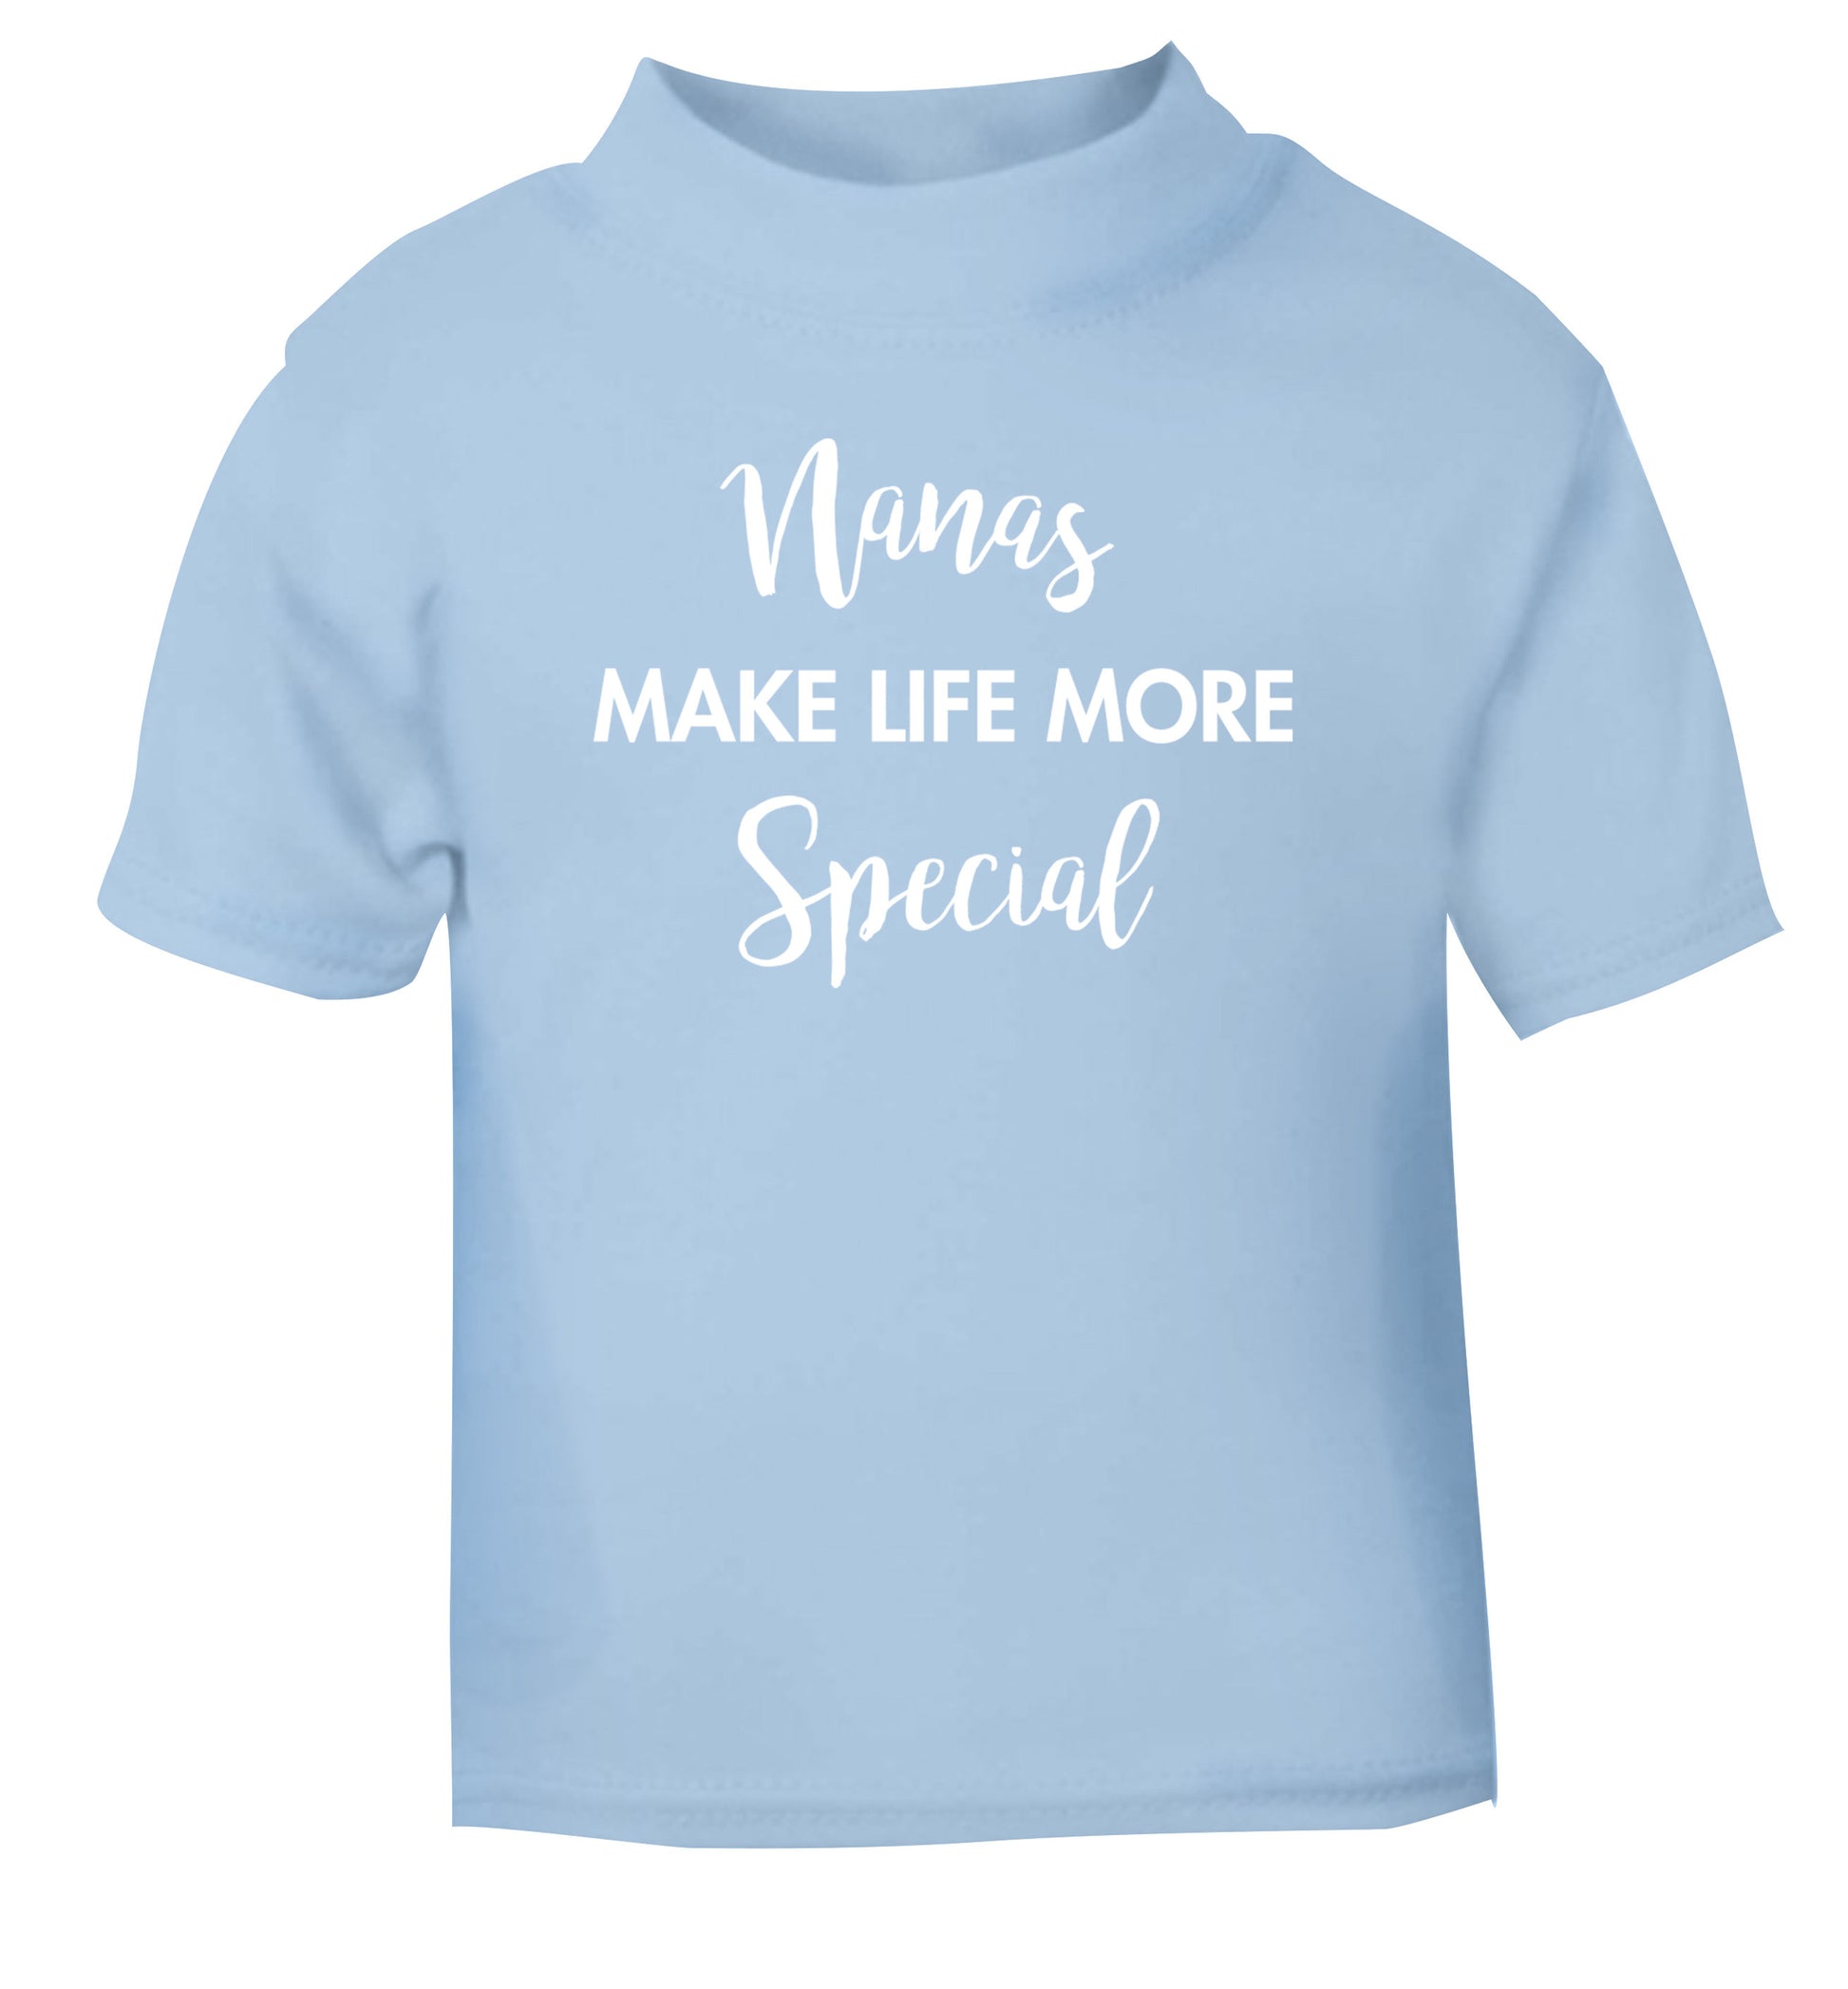 Nanas make life more special light blue Baby Toddler Tshirt 2 Years